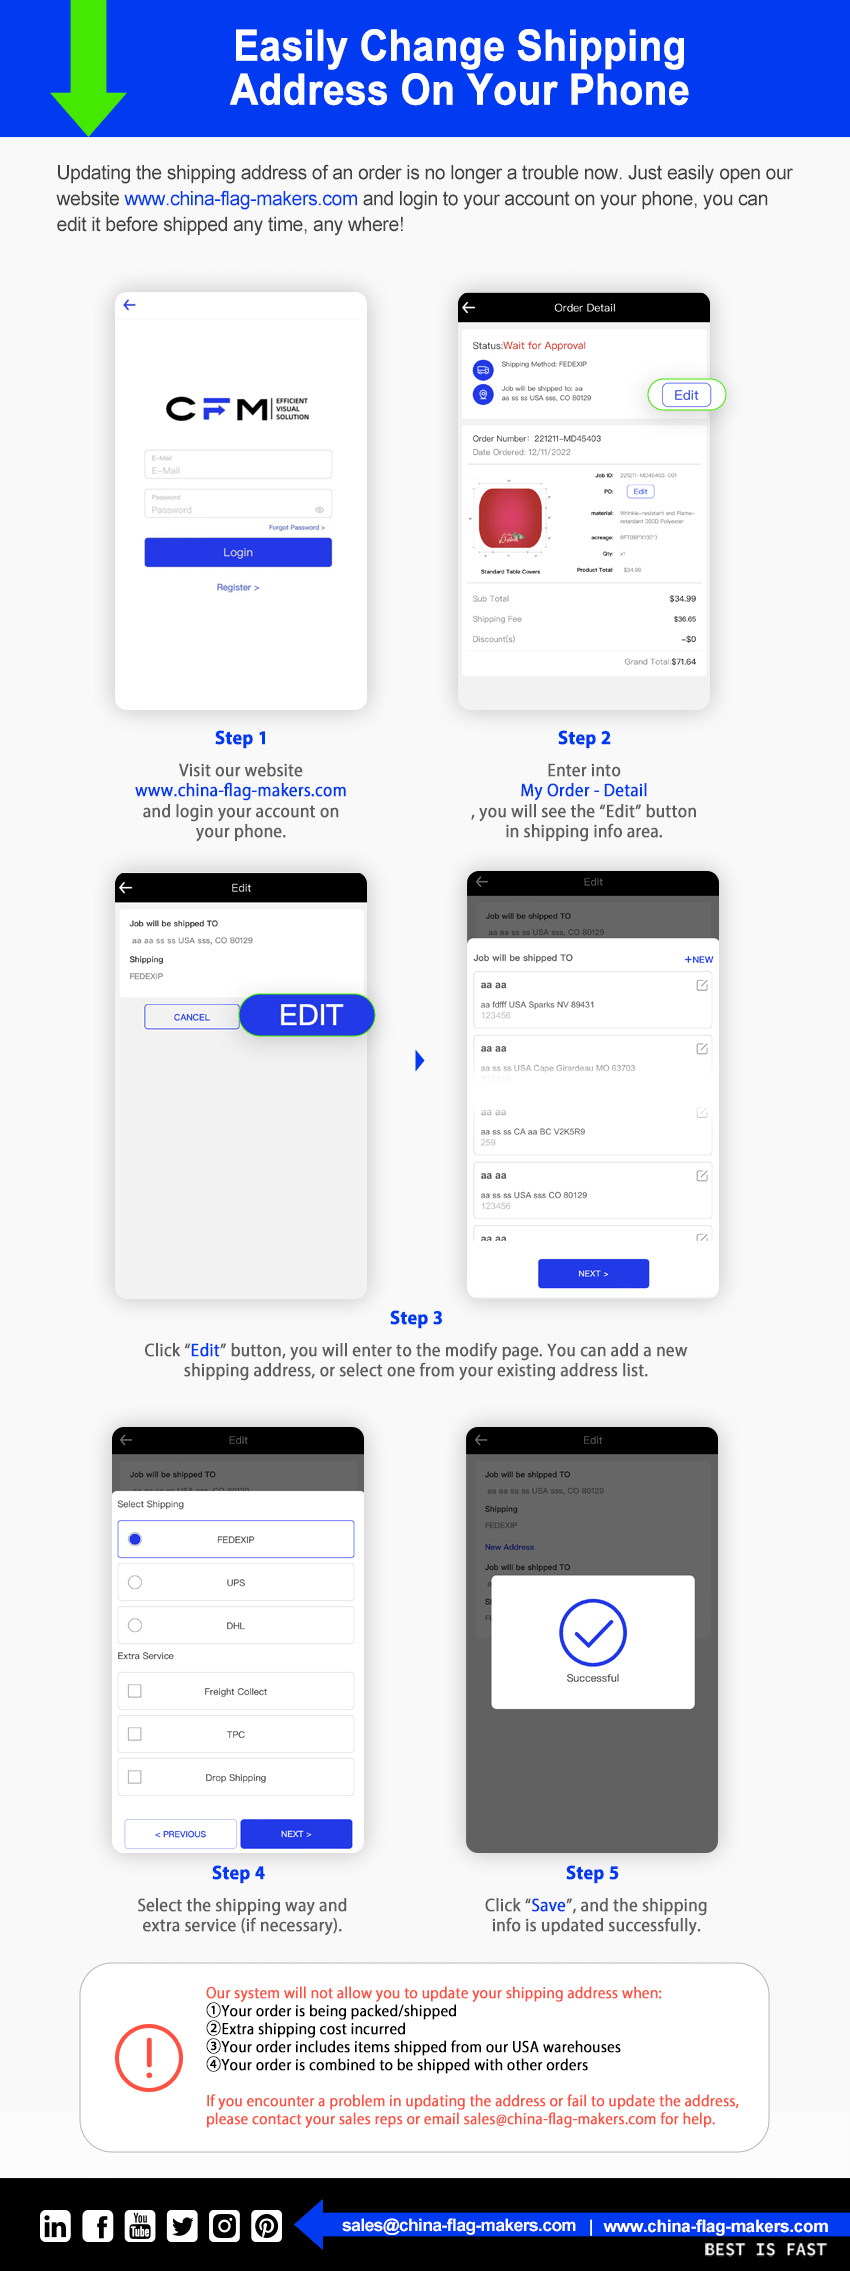 Easily Change Shipping Address on your Phone.png